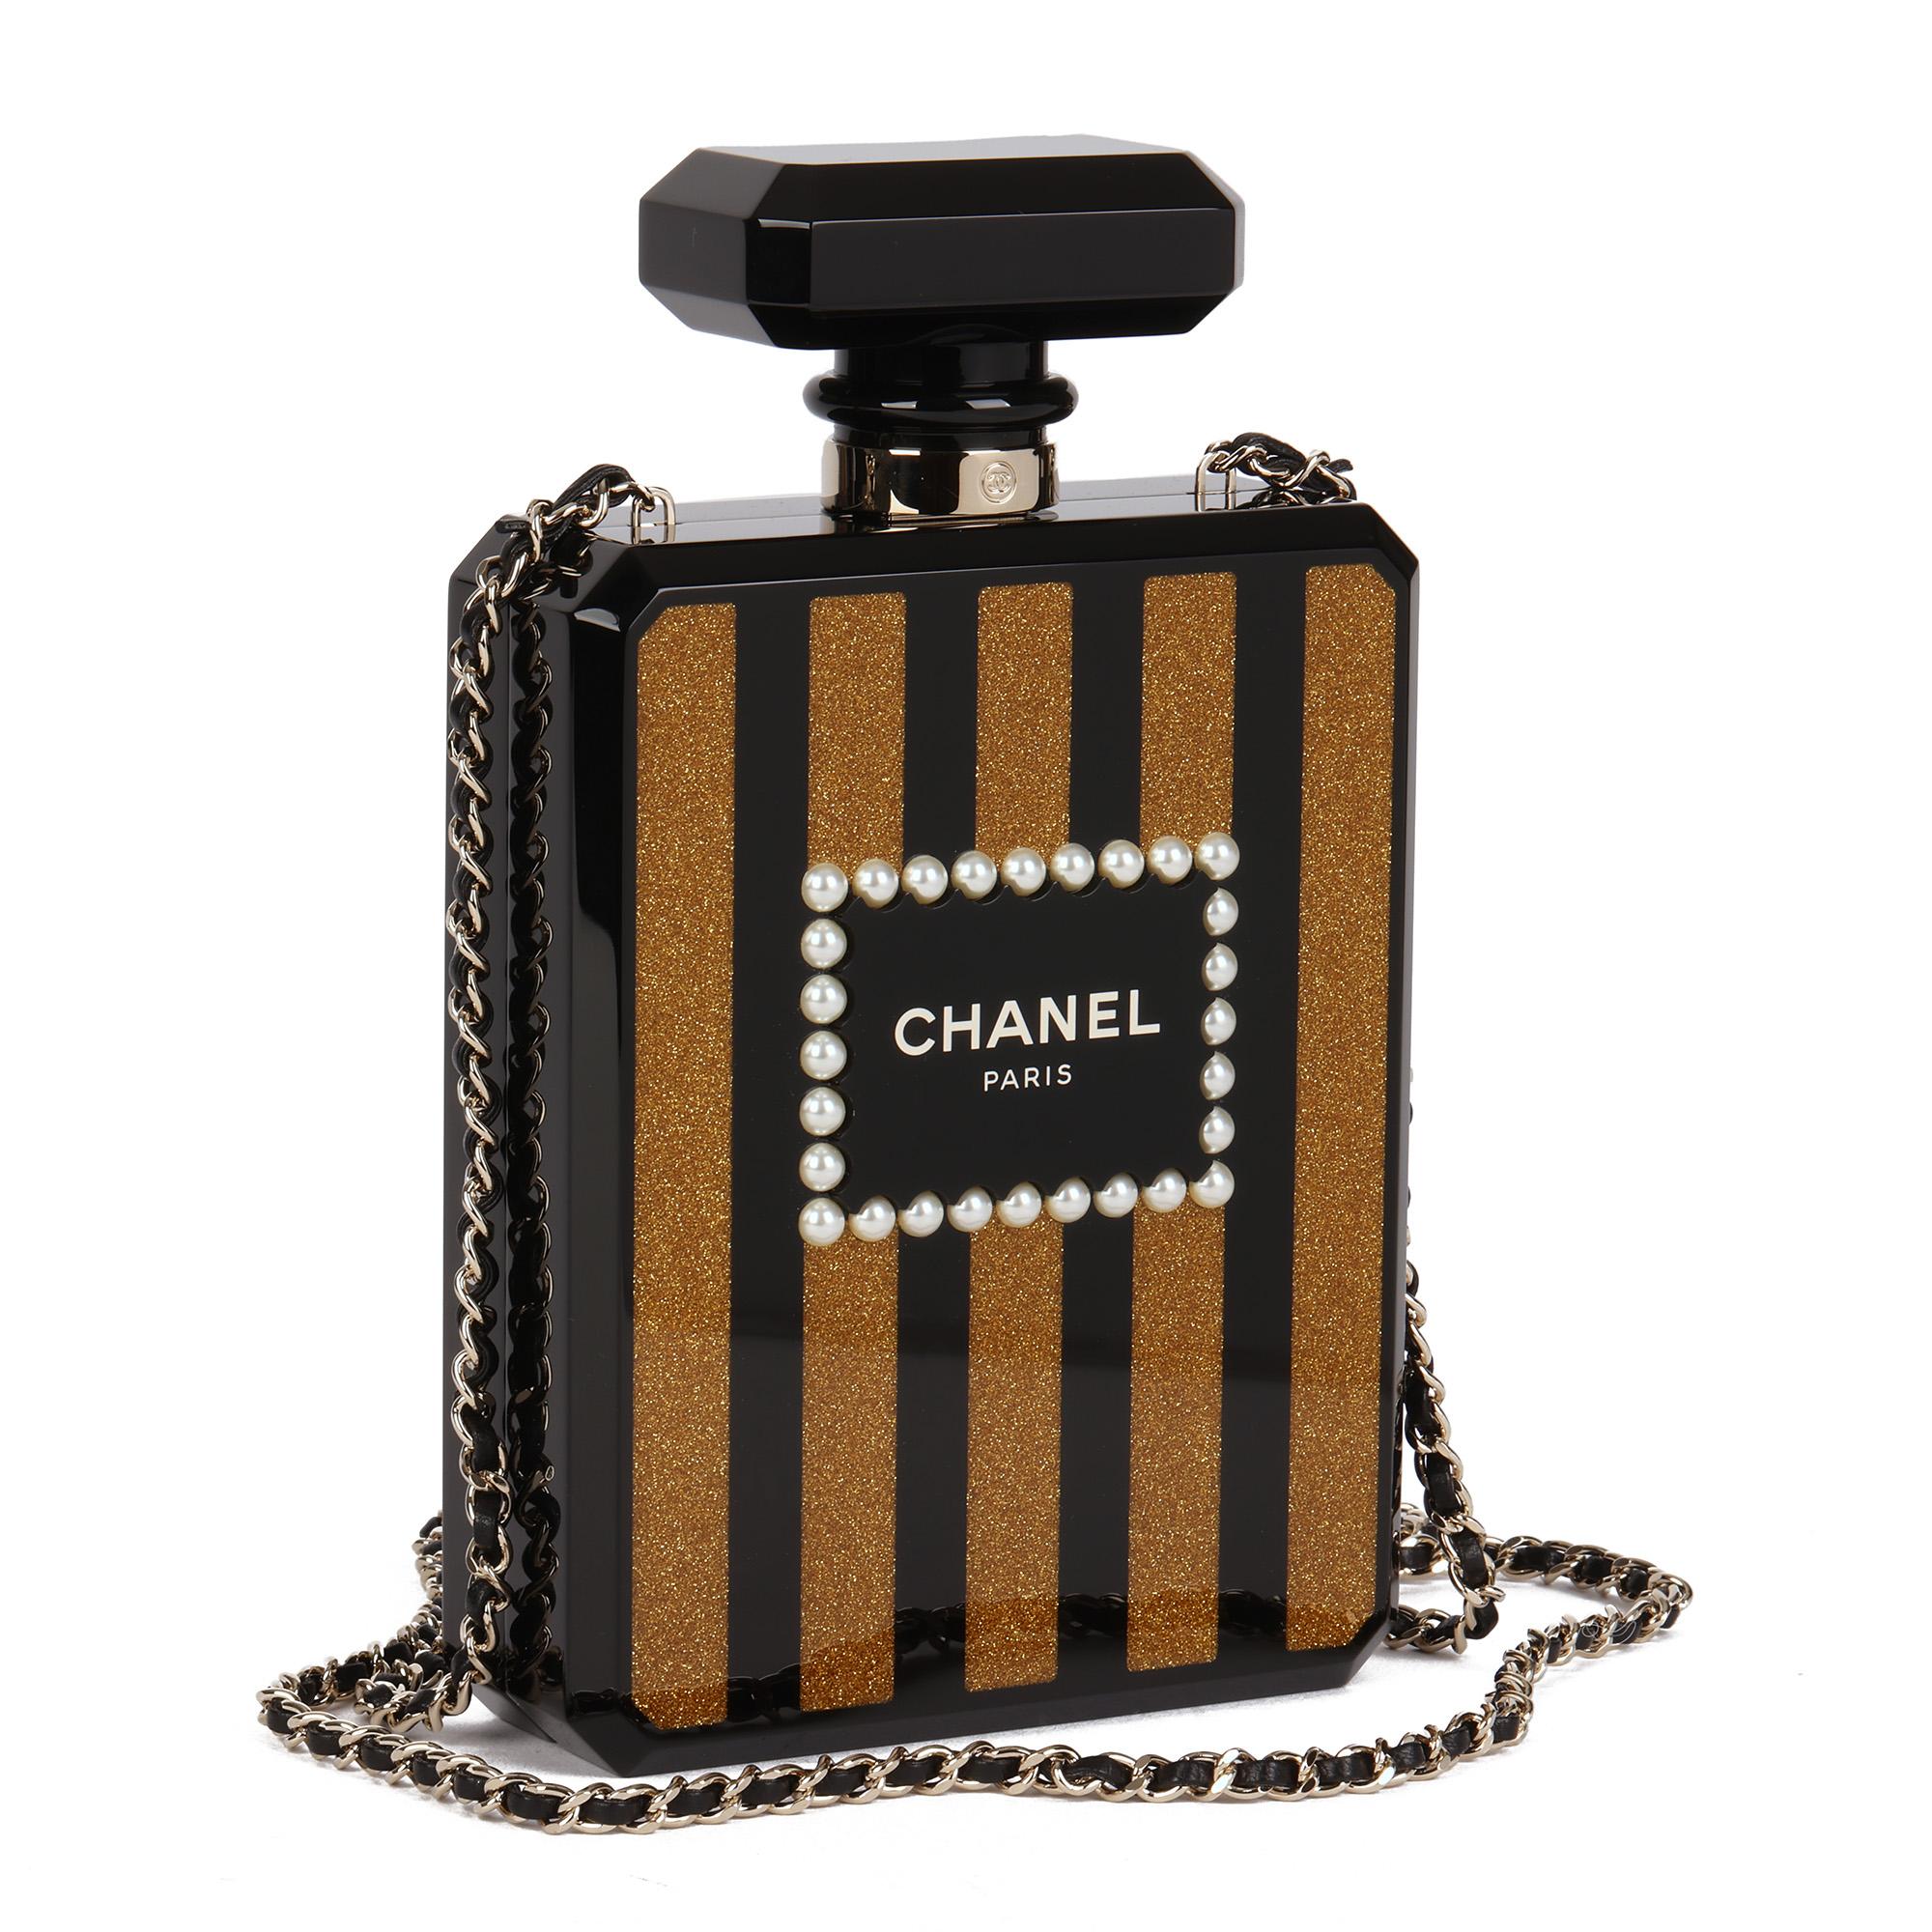 CHANEL
Black & Gold Glitter Plexiglass Pearl Embellished Perfume Bottle Minaudière

Xupes Reference: HB4434
Serial Number: 23724983
Age (Circa): 2017
Accompanied By: Chanel Dust Bag, Box, Care Booklet, Selfridges Receipt, Authenticity